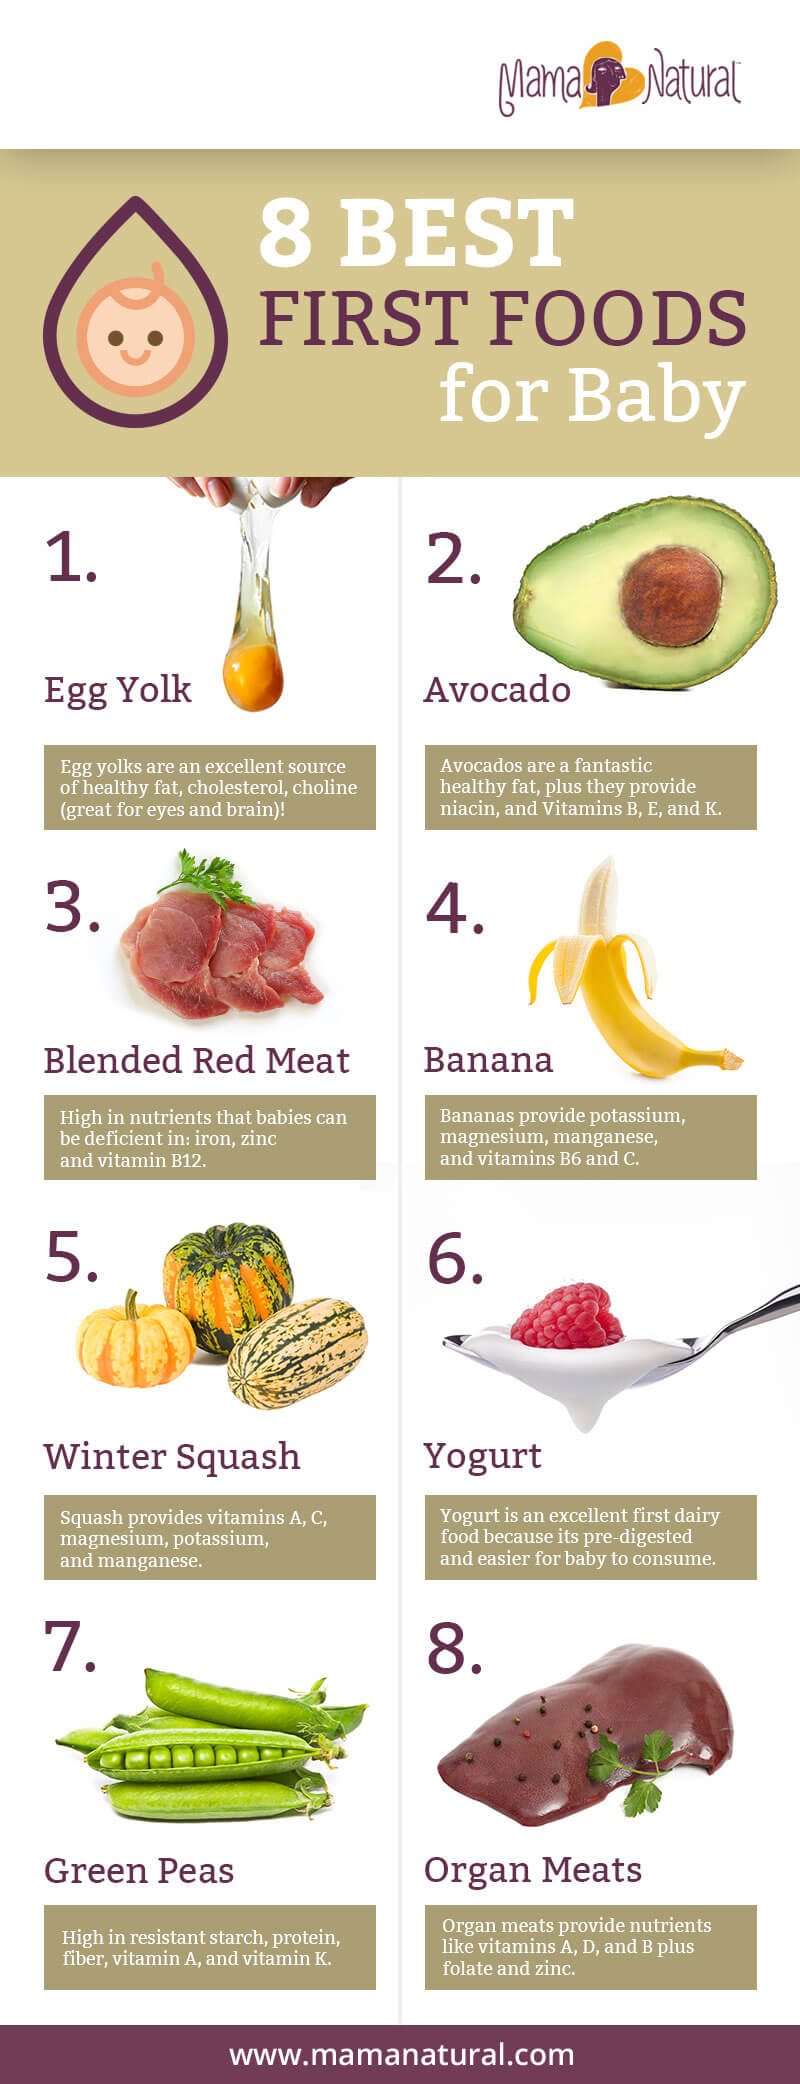 The (Surprising) Best First Foods for Baby - baby post by Mama Natural Pinterest